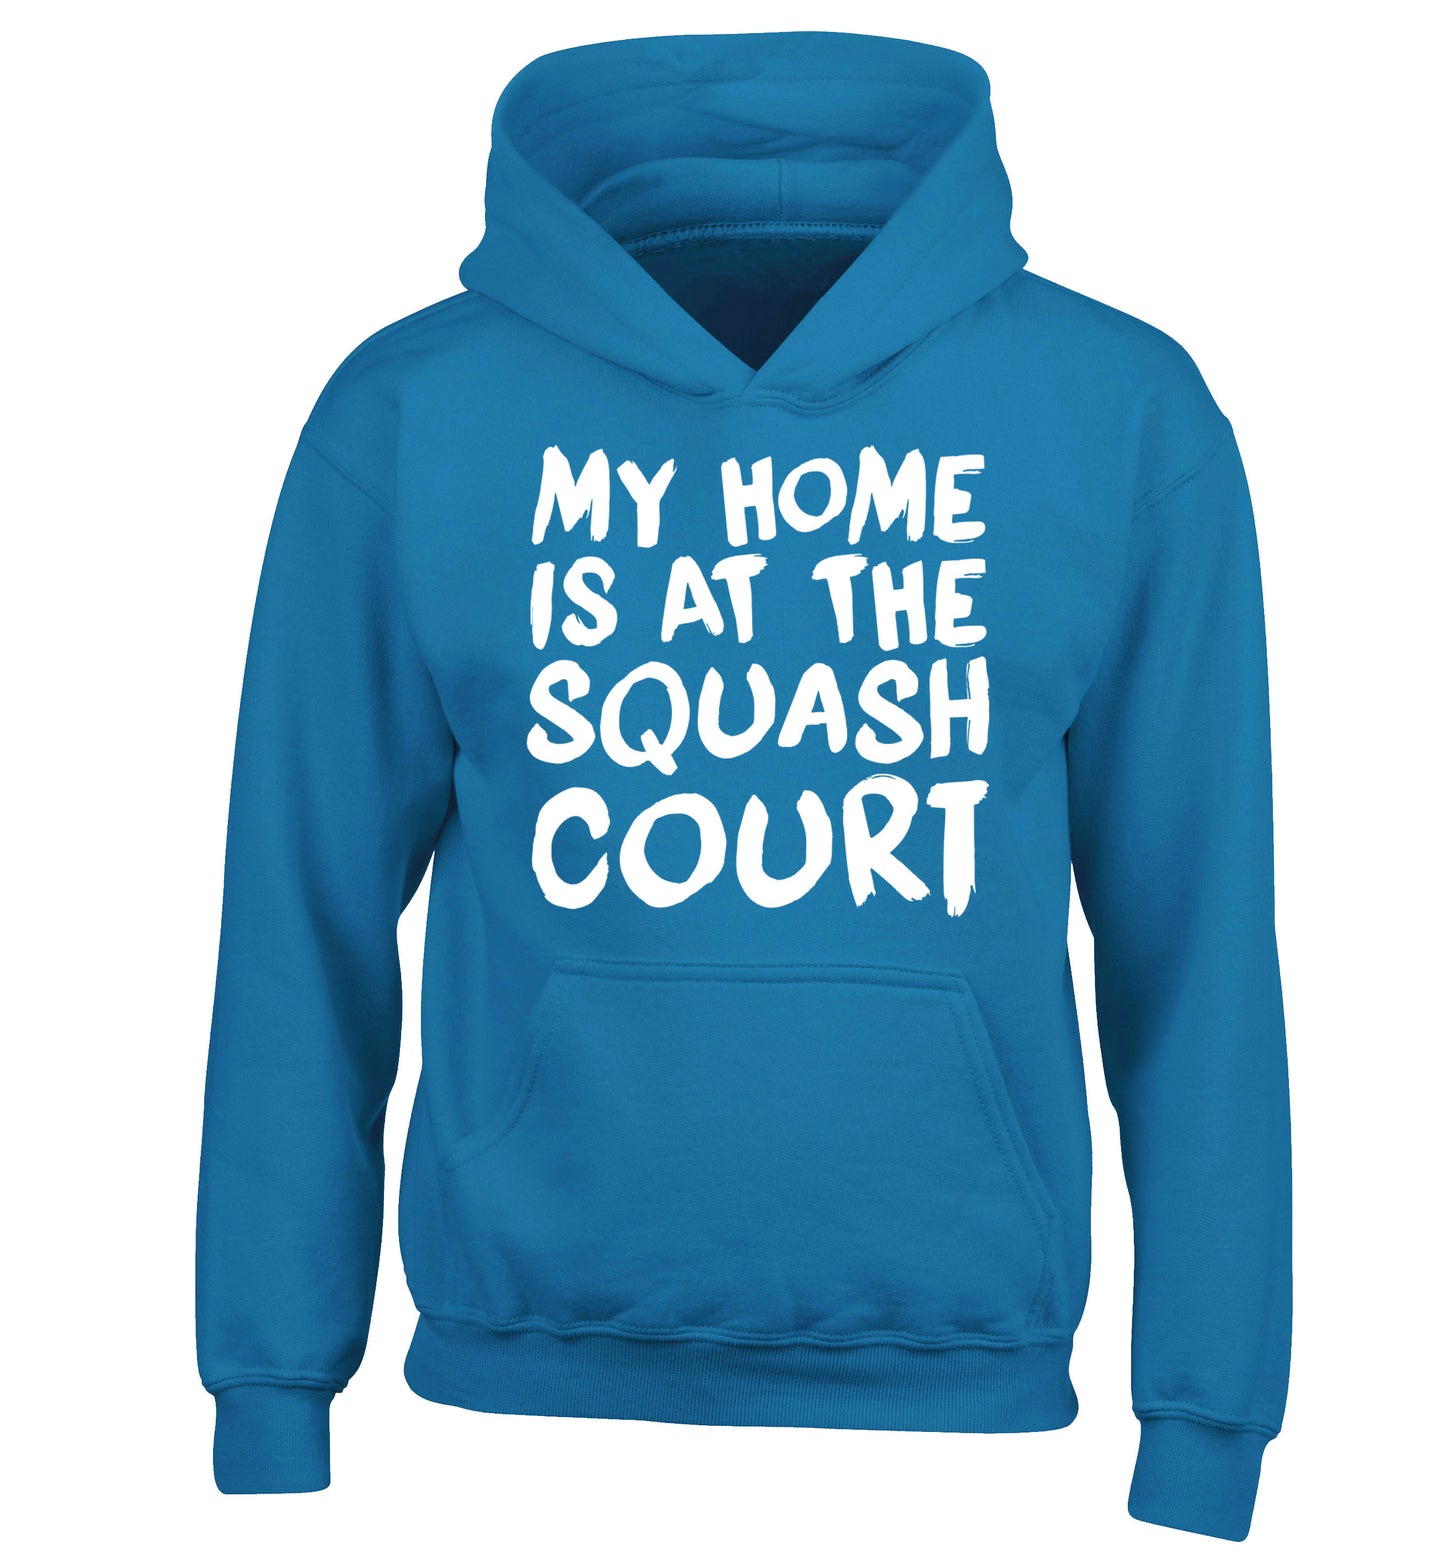 My home is at the squash court children's blue hoodie 12-14 Years